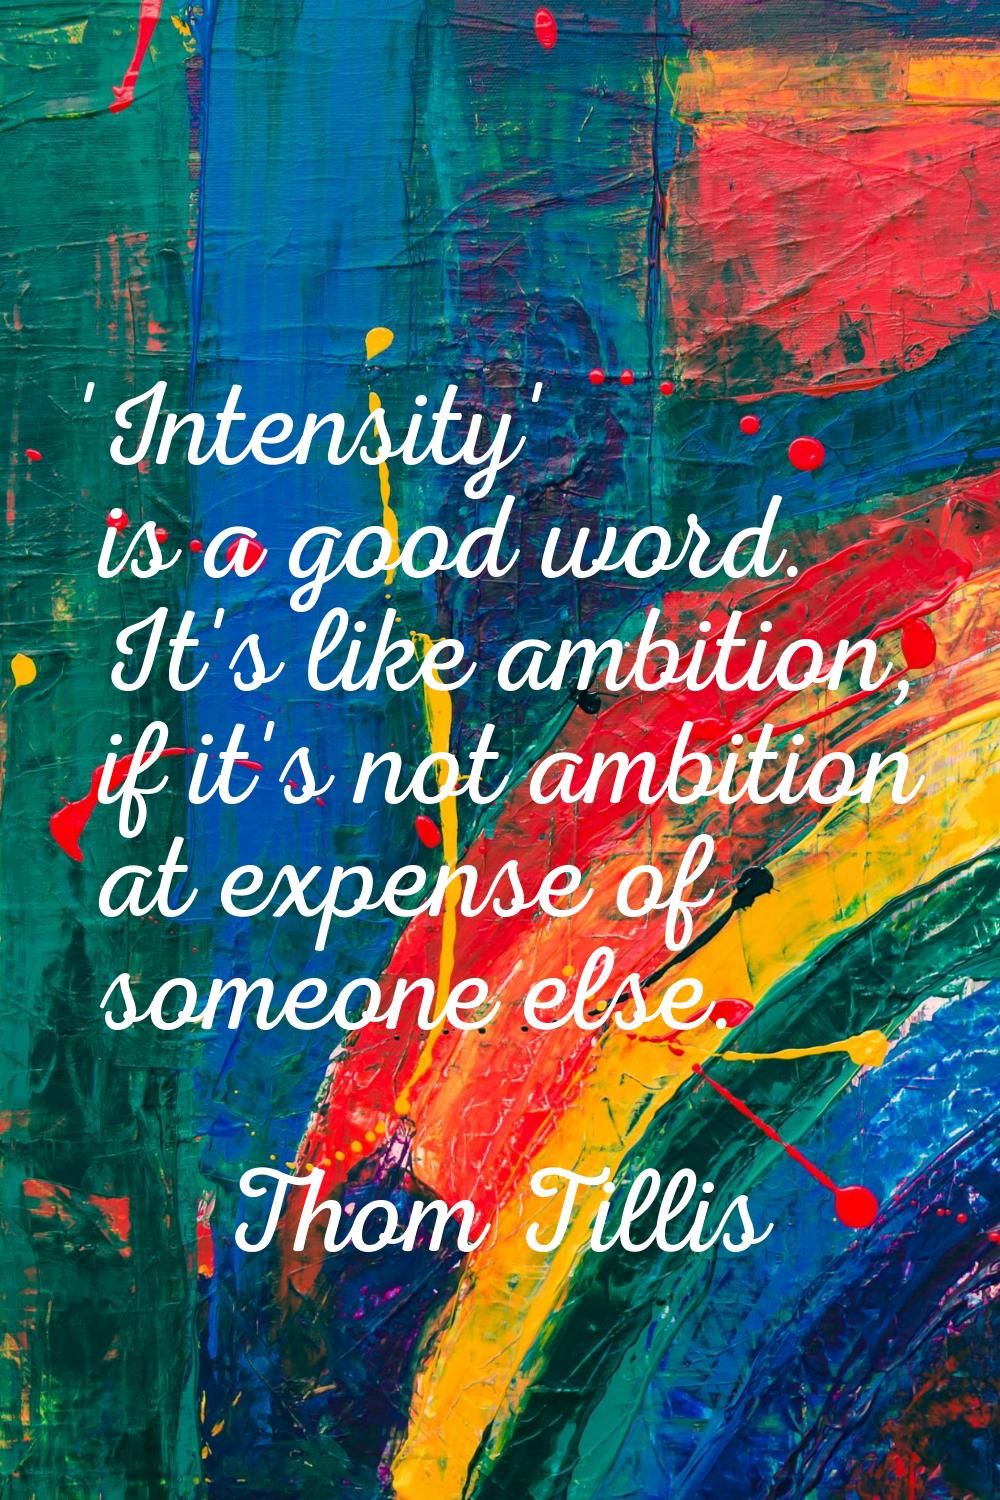 'Intensity' is a good word. It's like ambition, if it's not ambition at expense of someone else.